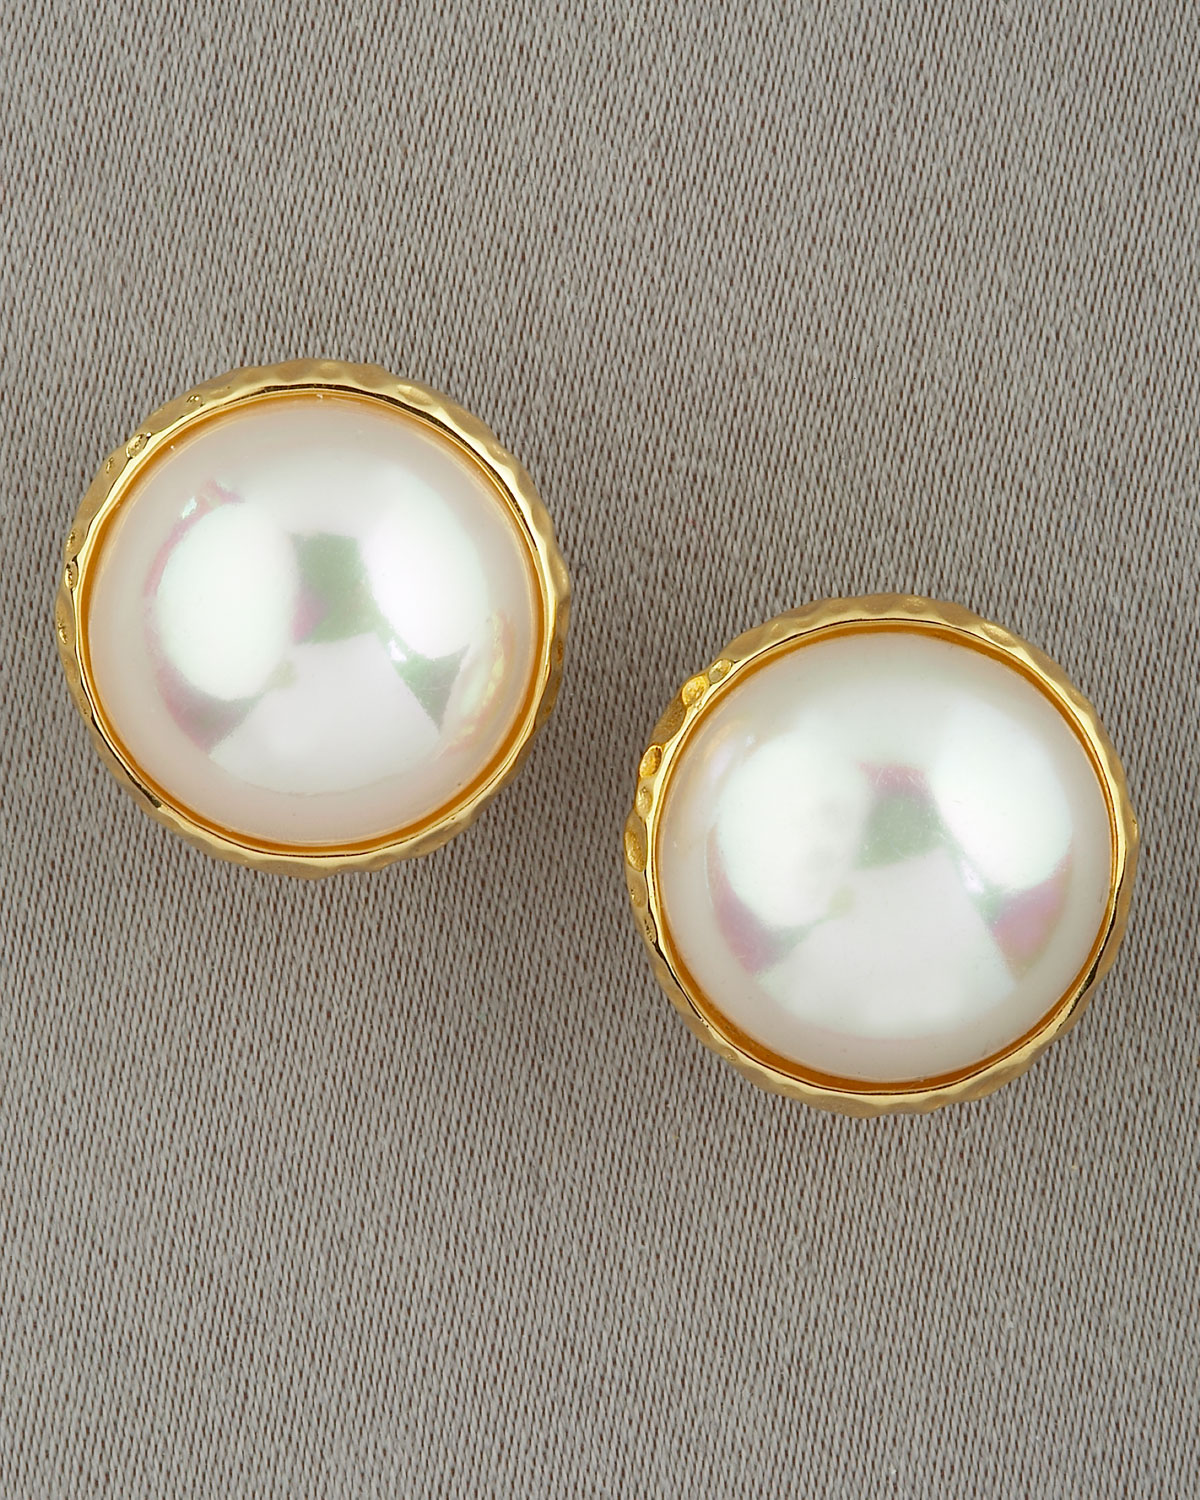 Lyst - Majorica Mabe Pearl Earrings, White in White